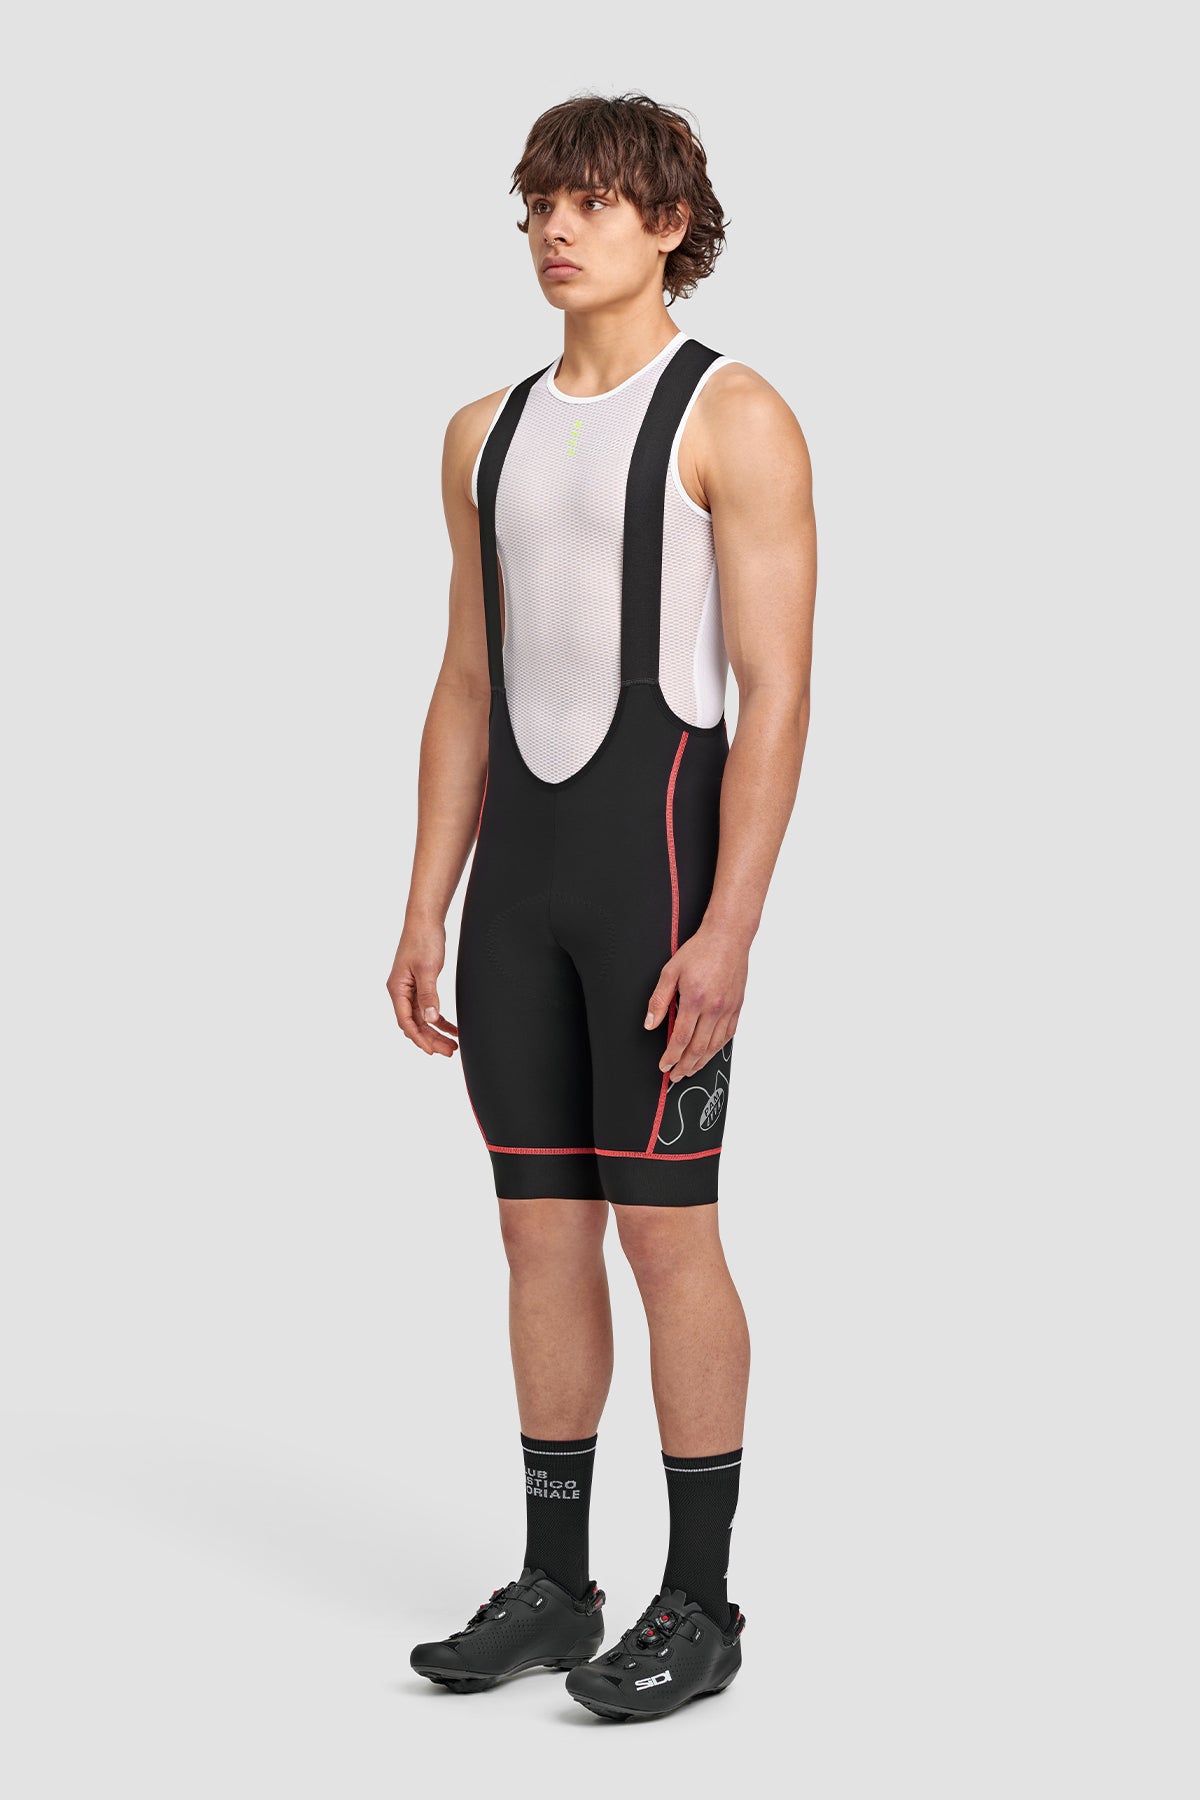 The PAAM 3.0 CARGO BIB SHORTS  available online with global shipping, and in PAM Stores Melbourne and Sydney.